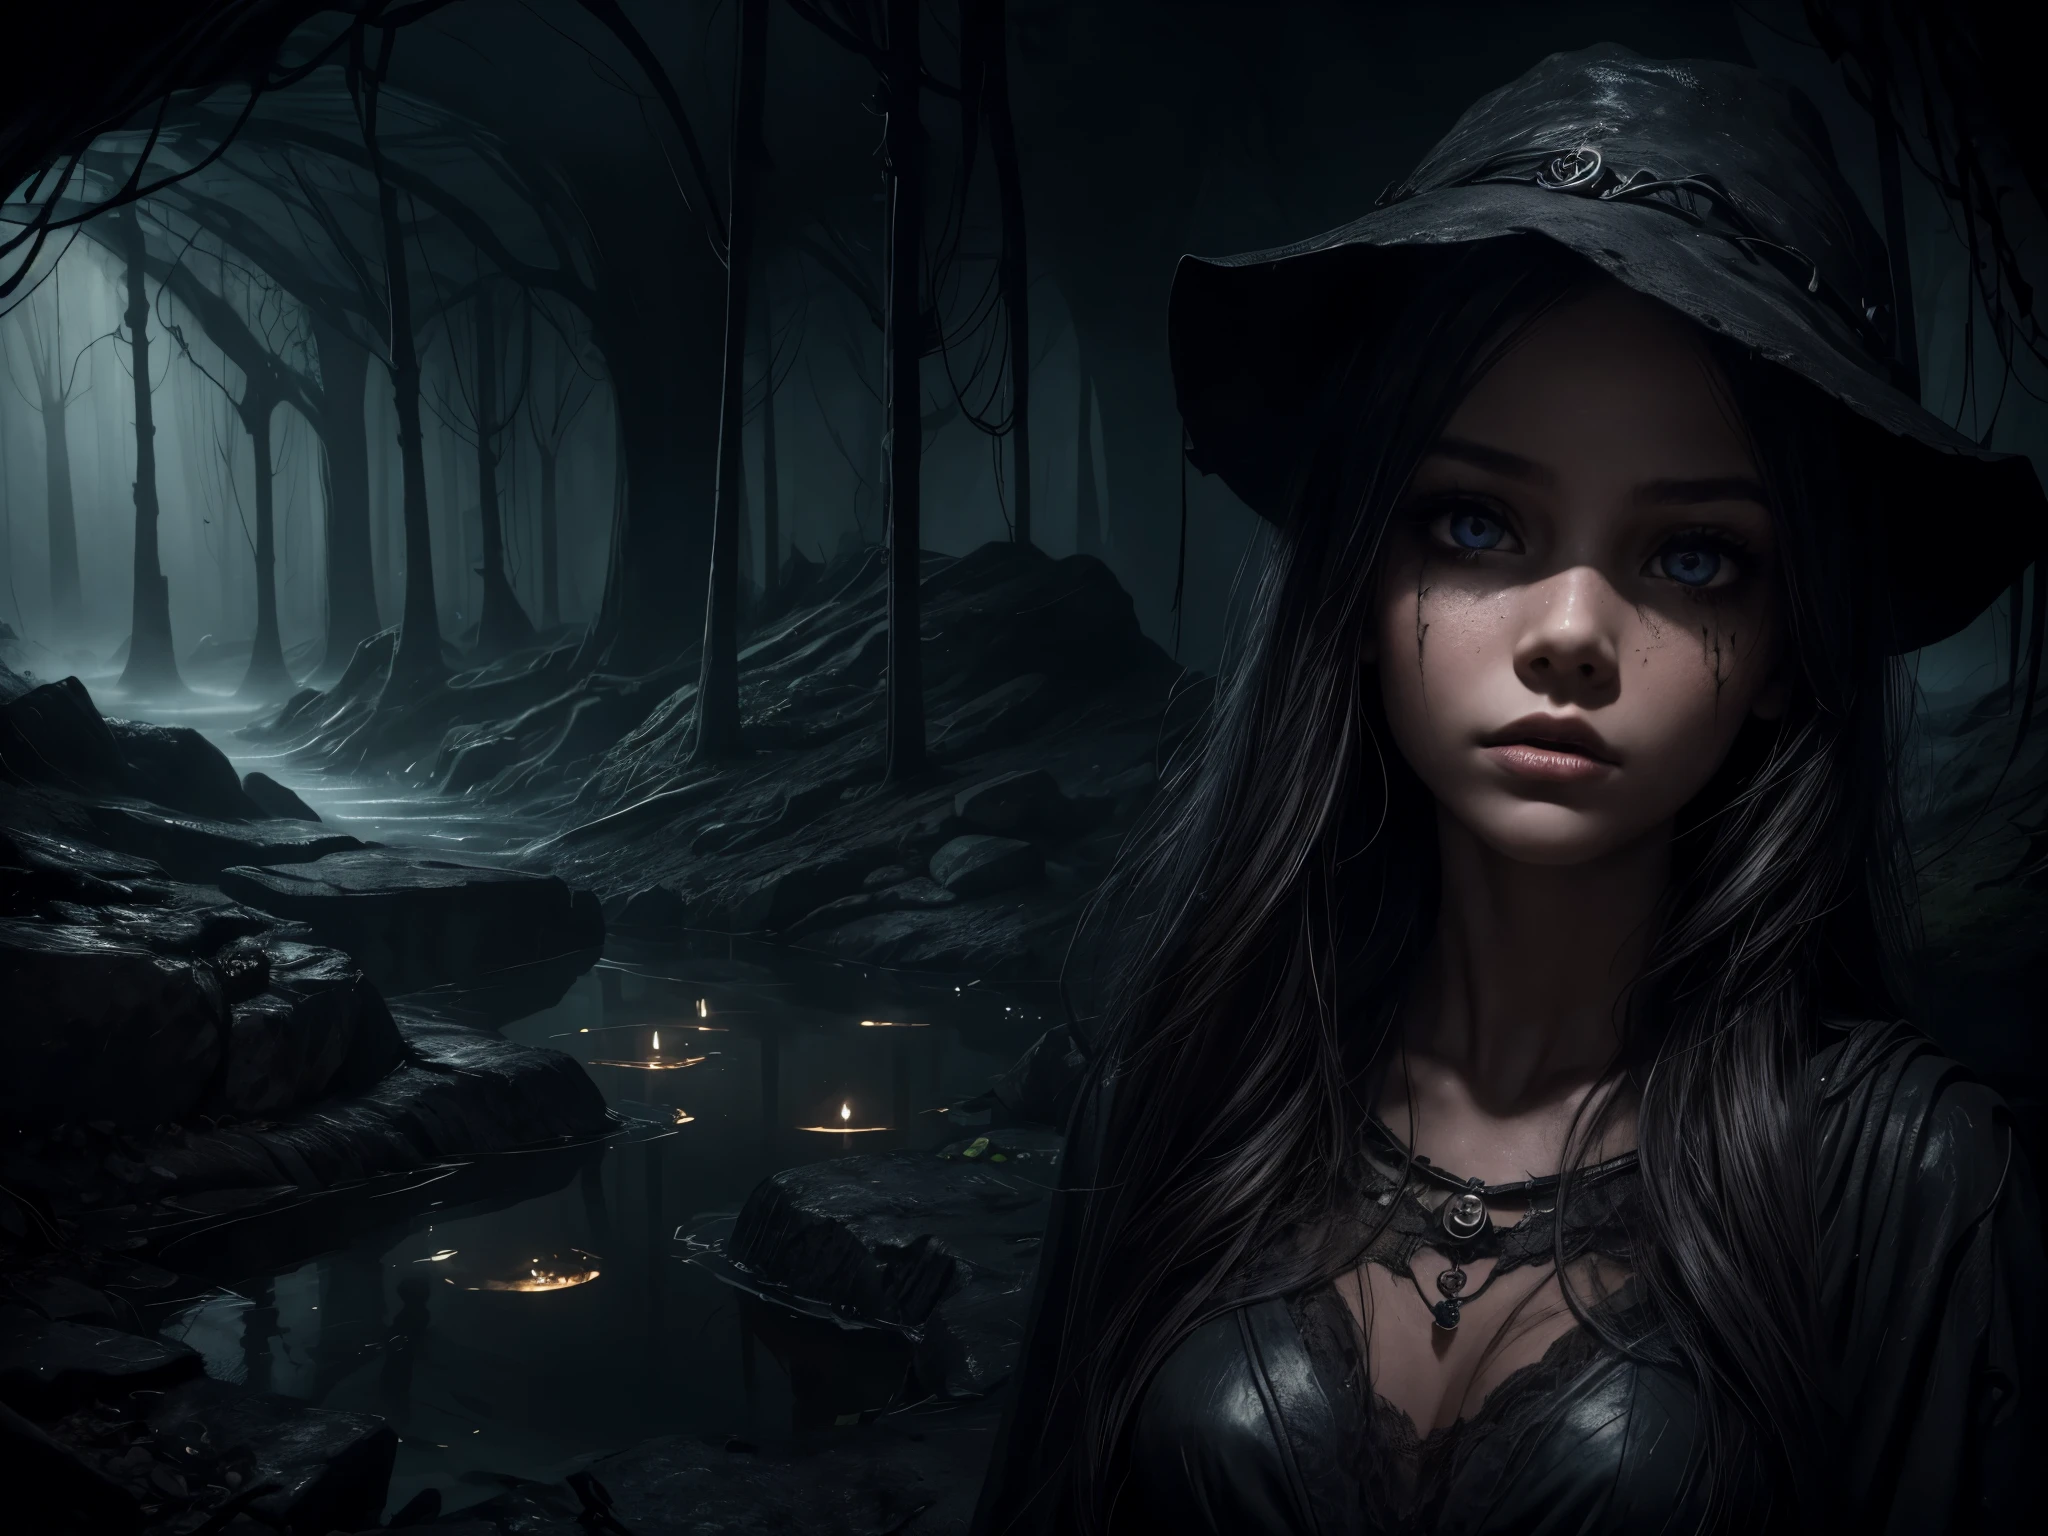 a girl lost in an underground maze,details of beautiful eyes,beautiful detailed lips,longeyelashes,skull,bats,a river flowing underground,illustration,highres,ultra-detailed,photorealistic,dark atmosphere,gloomy lighting,stone textures,mysterious shadows,spooky scenery,horror,subterranean,underground river,lit torches,damp walls,winding paths